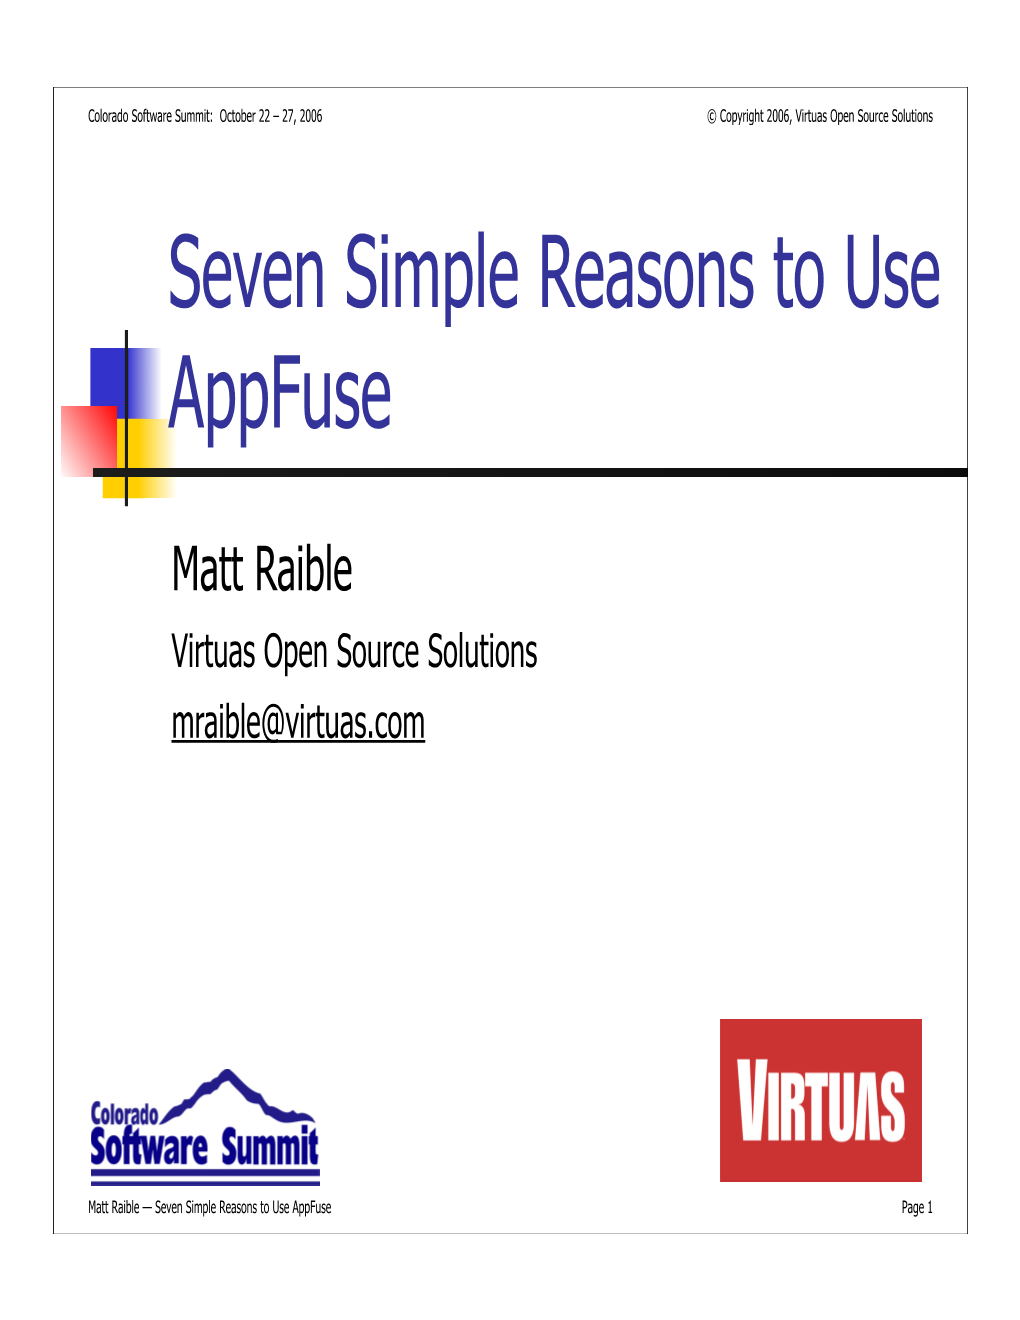 Seven Simple Reasons to Use Appfuse